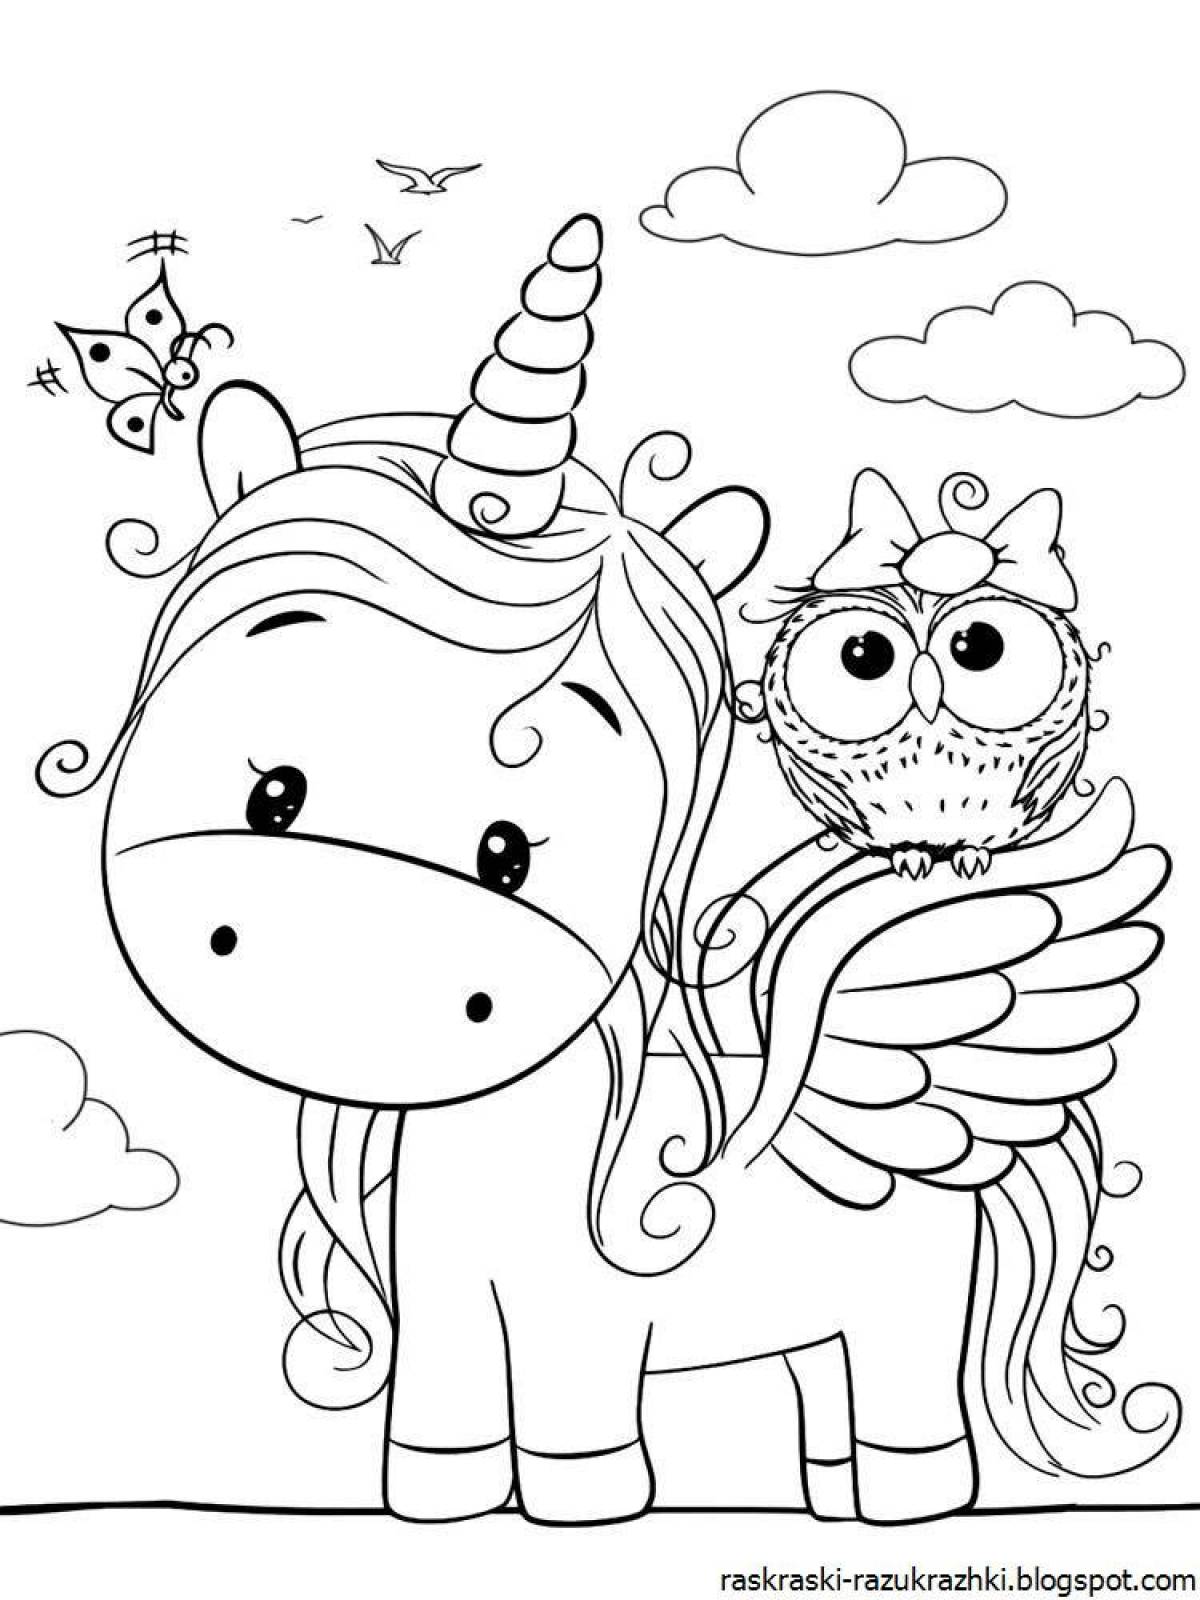 Coloring book for girls unicorns